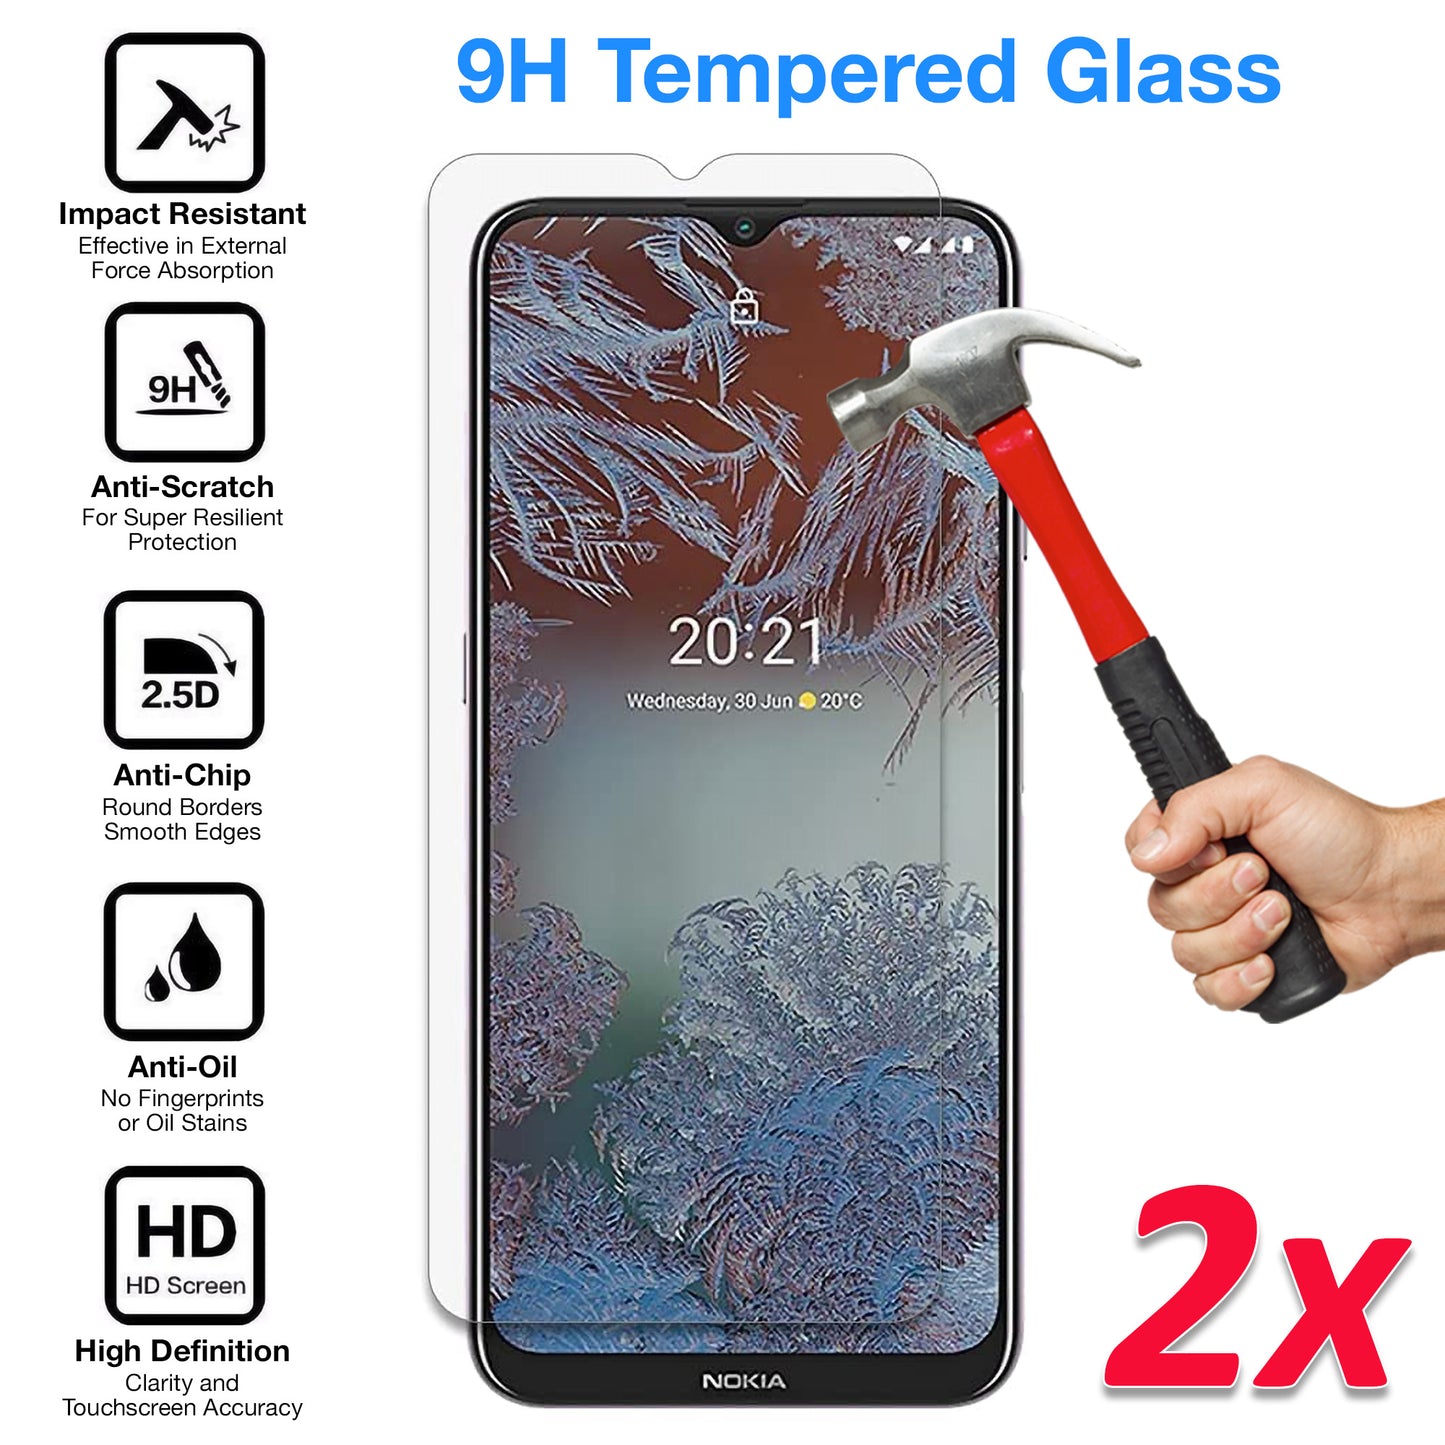 [2 Pack] MEZON Nokia G10 Tempered Glass Crystal Clear Premium 9H HD Case Friendly Screen Protector (Nokia G10, 9H)